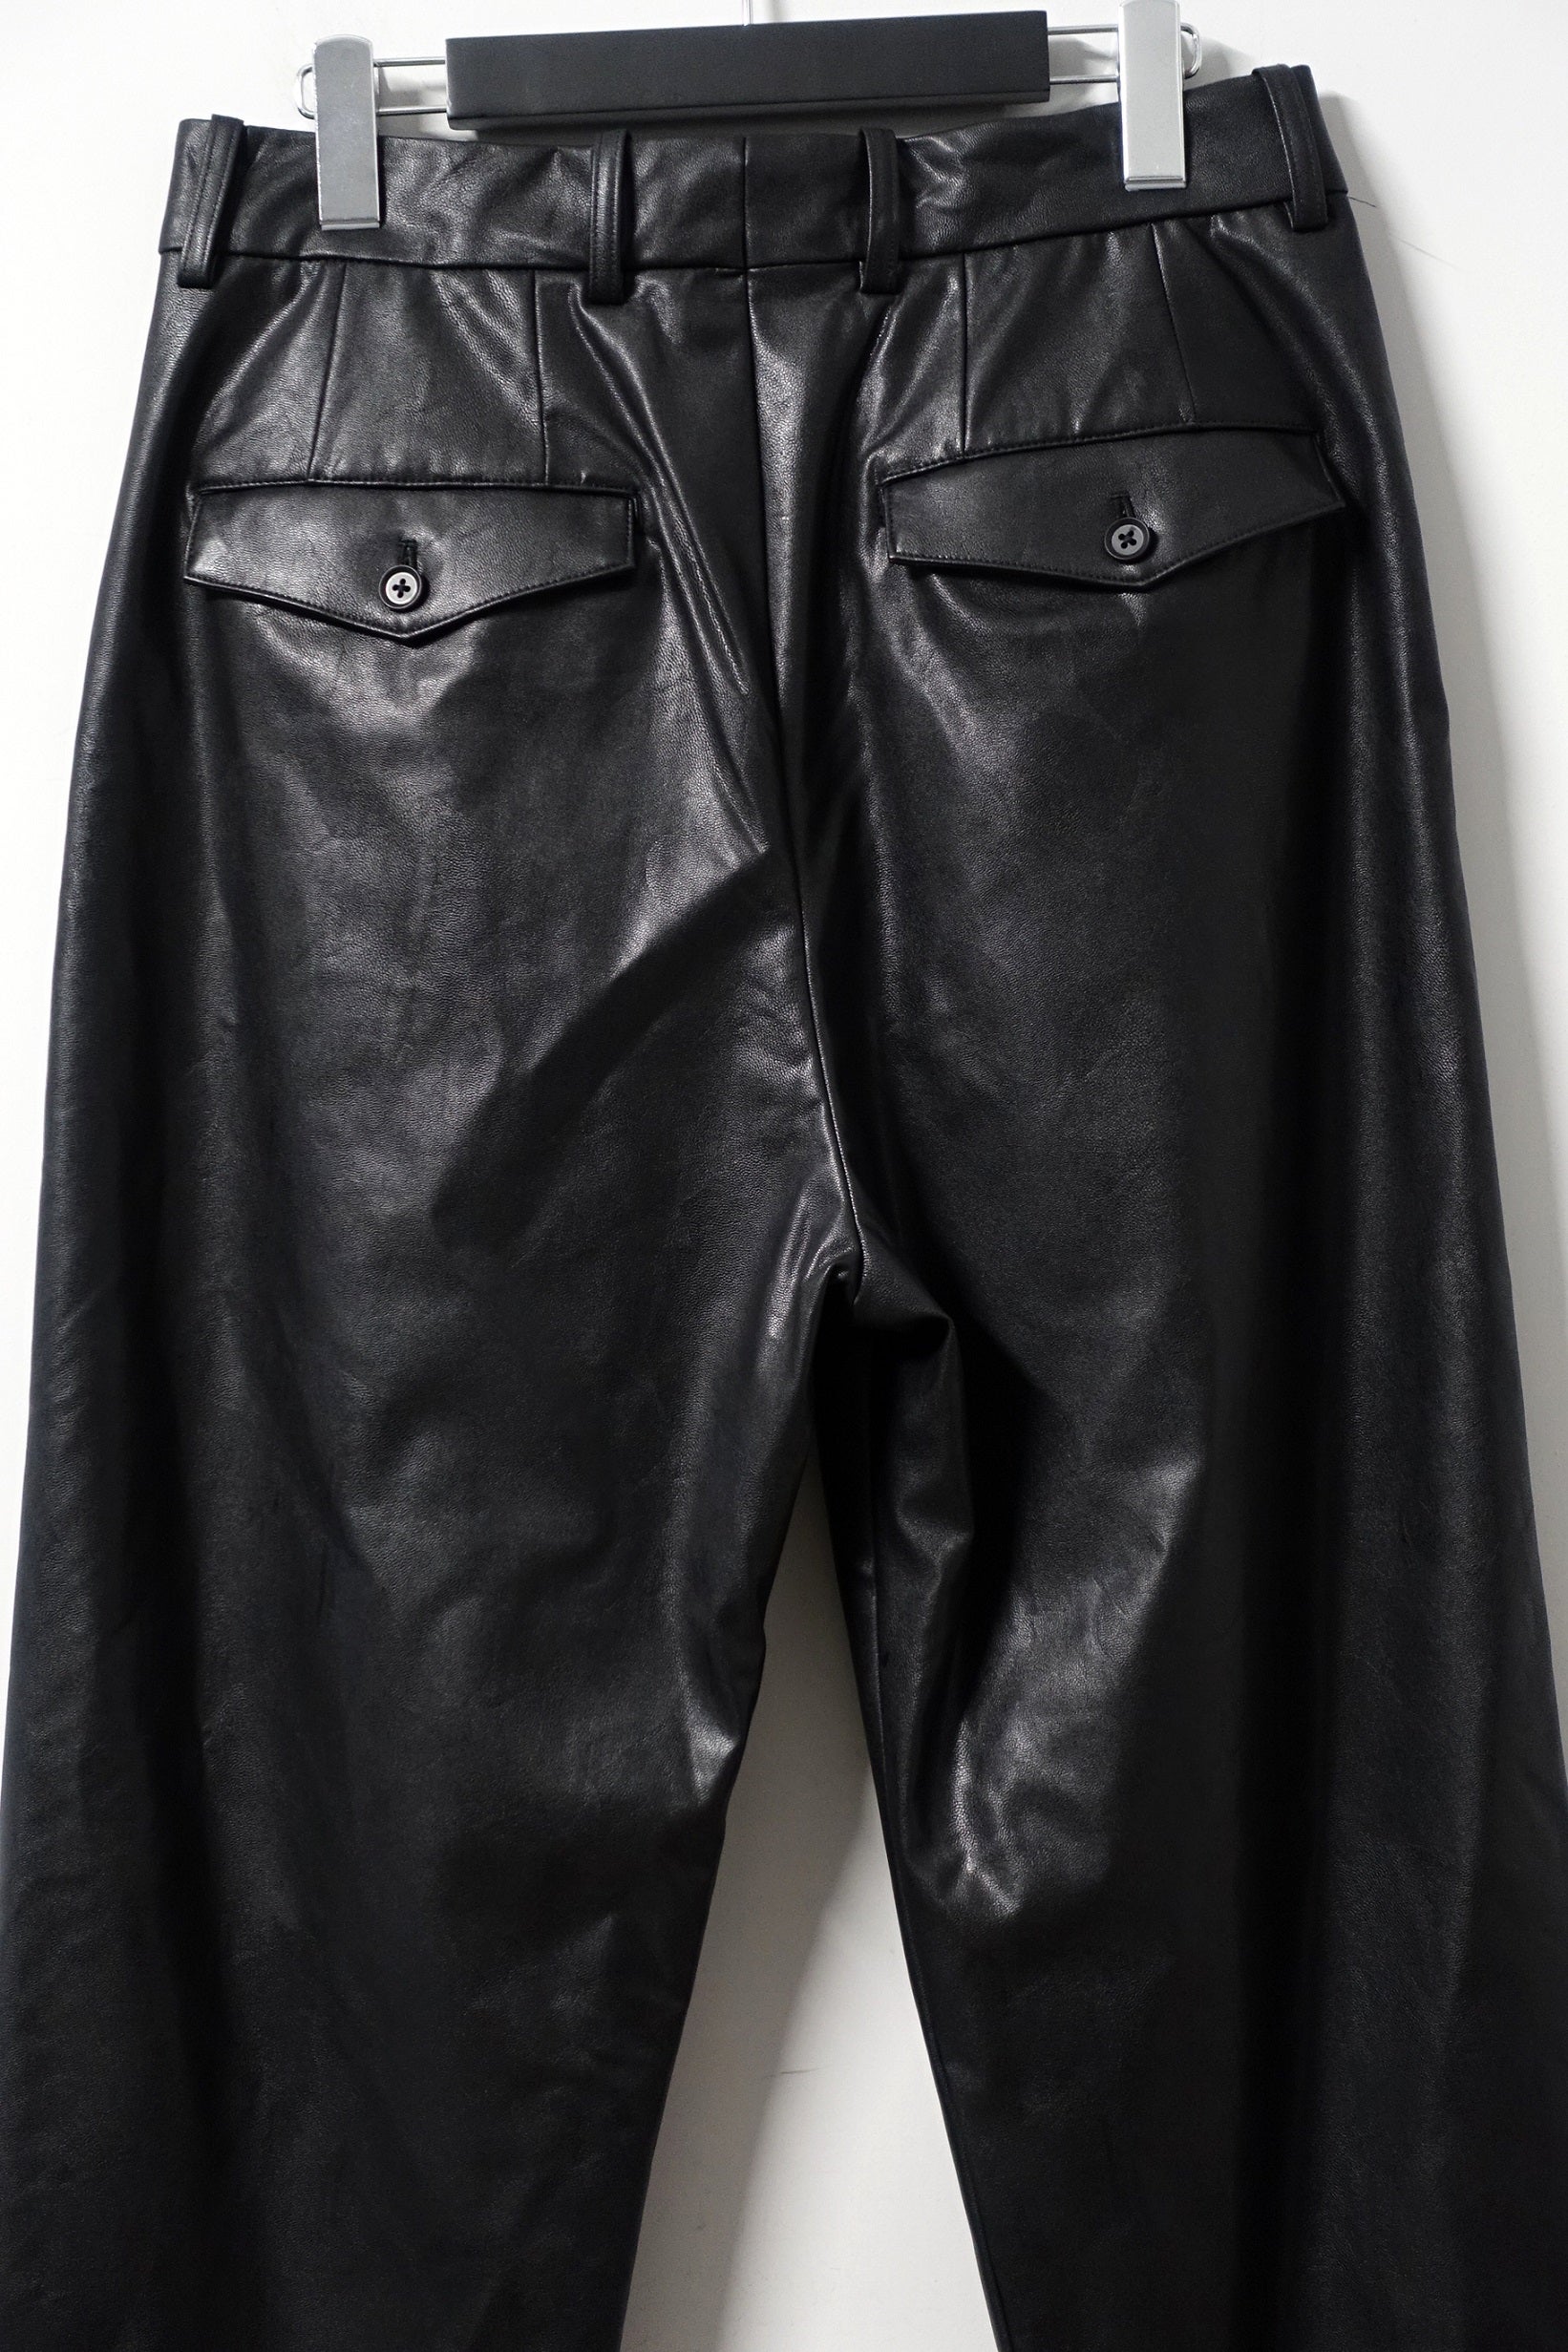 stein(シュタイン)/FAKE LEATHER TROUSERS/Black 通販 取り扱い 